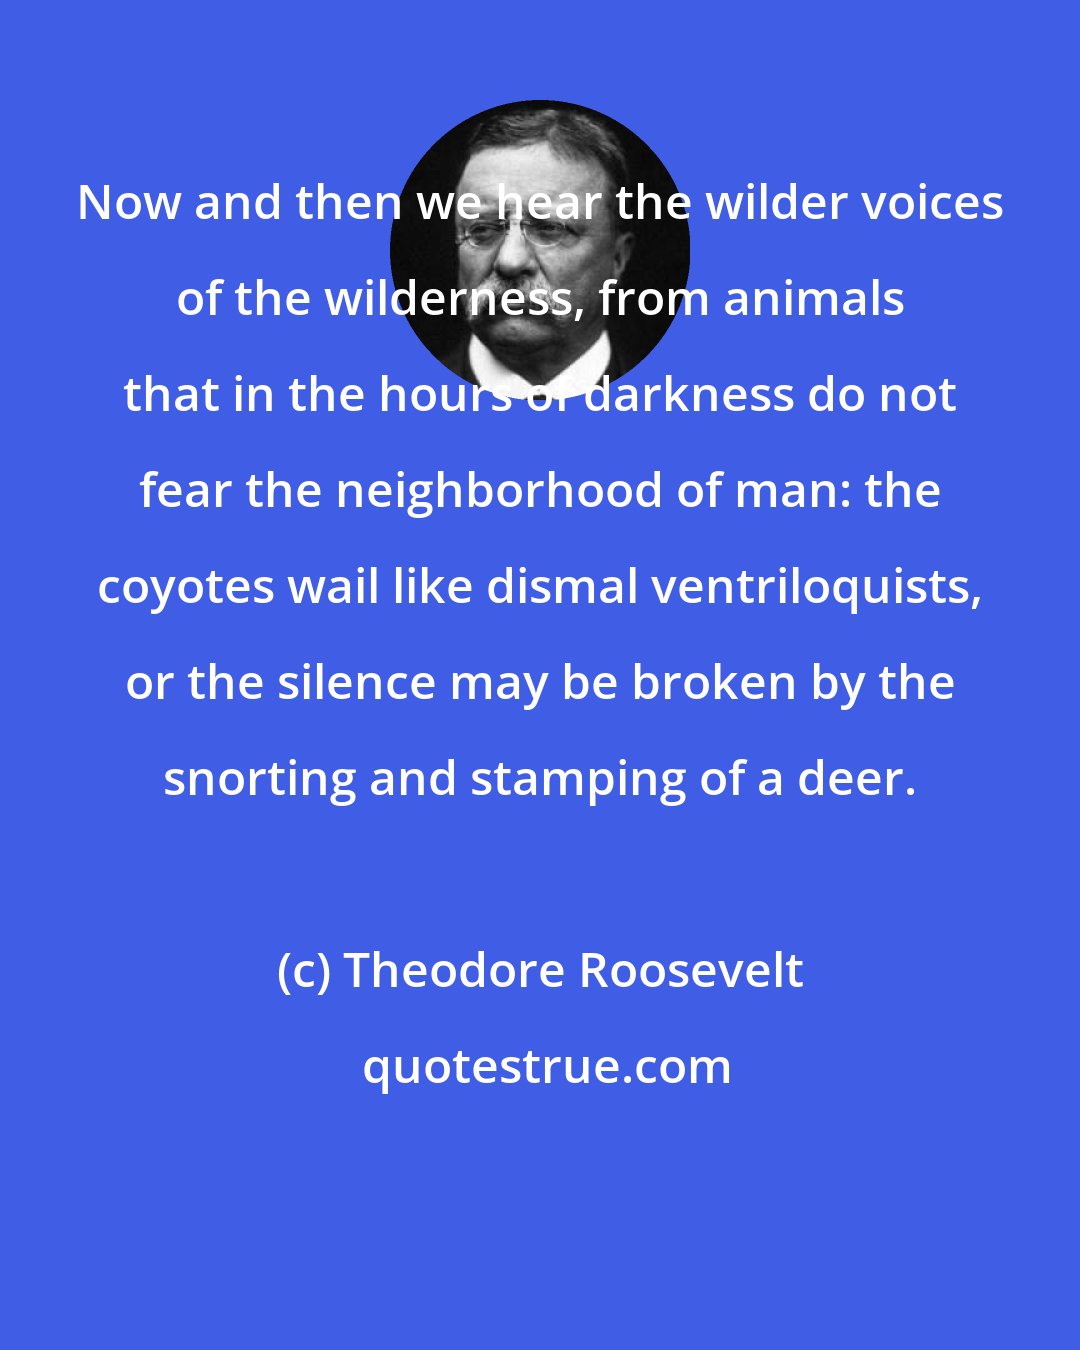 Theodore Roosevelt: Now and then we hear the wilder voices of the wilderness, from animals that in the hours of darkness do not fear the neighborhood of man: the coyotes wail like dismal ventriloquists, or the silence may be broken by the snorting and stamping of a deer.